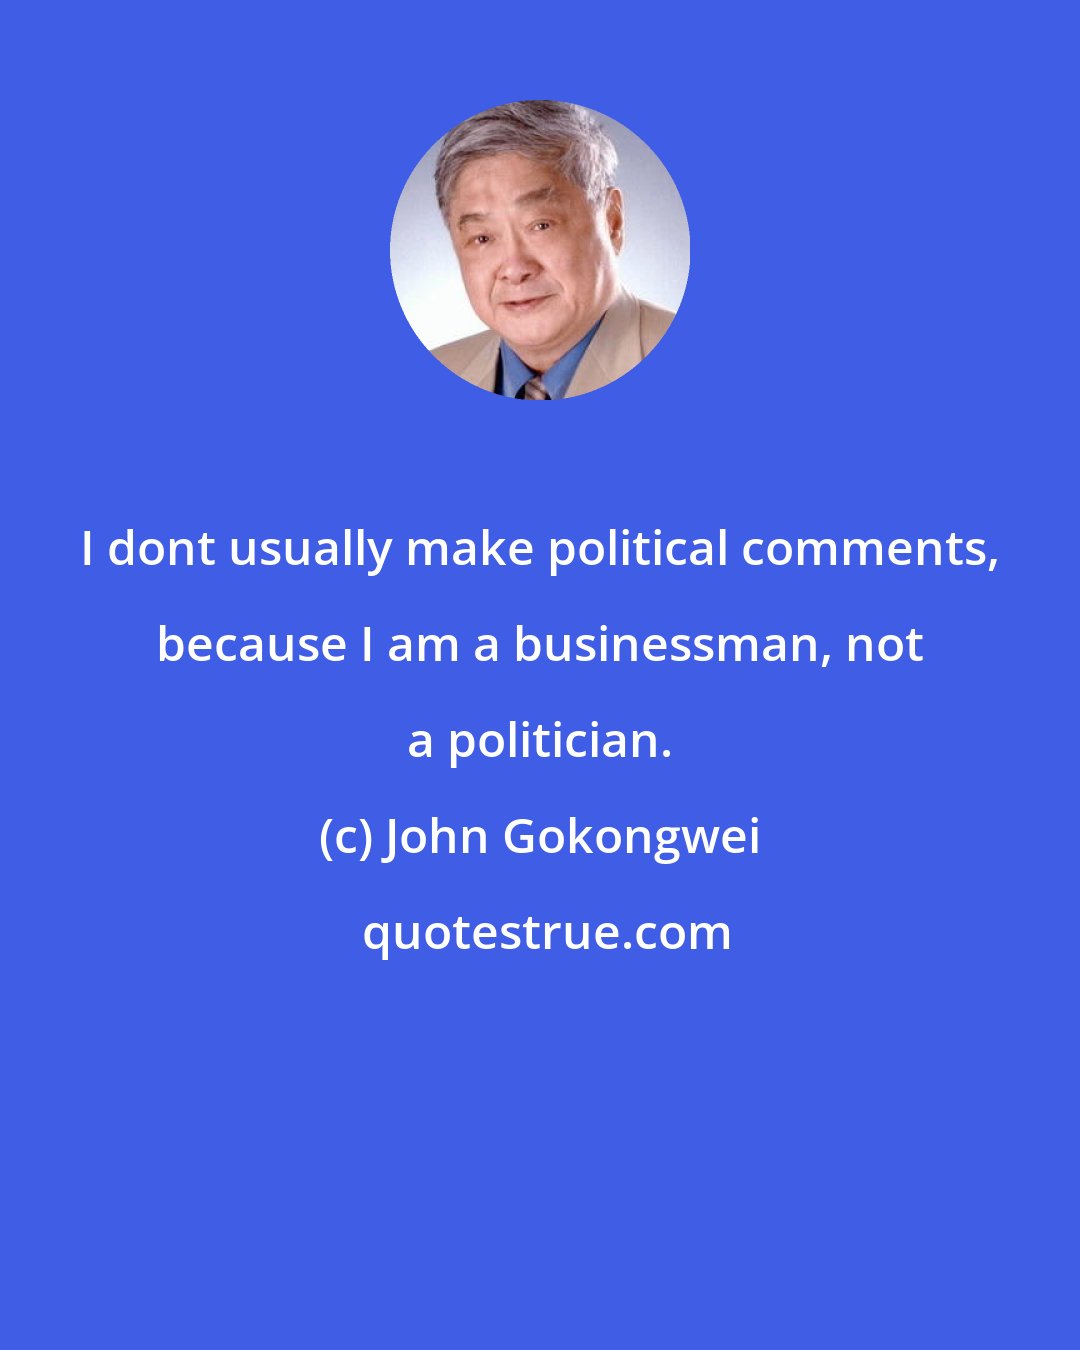 John Gokongwei: I dont usually make political comments, because I am a businessman, not a politician.